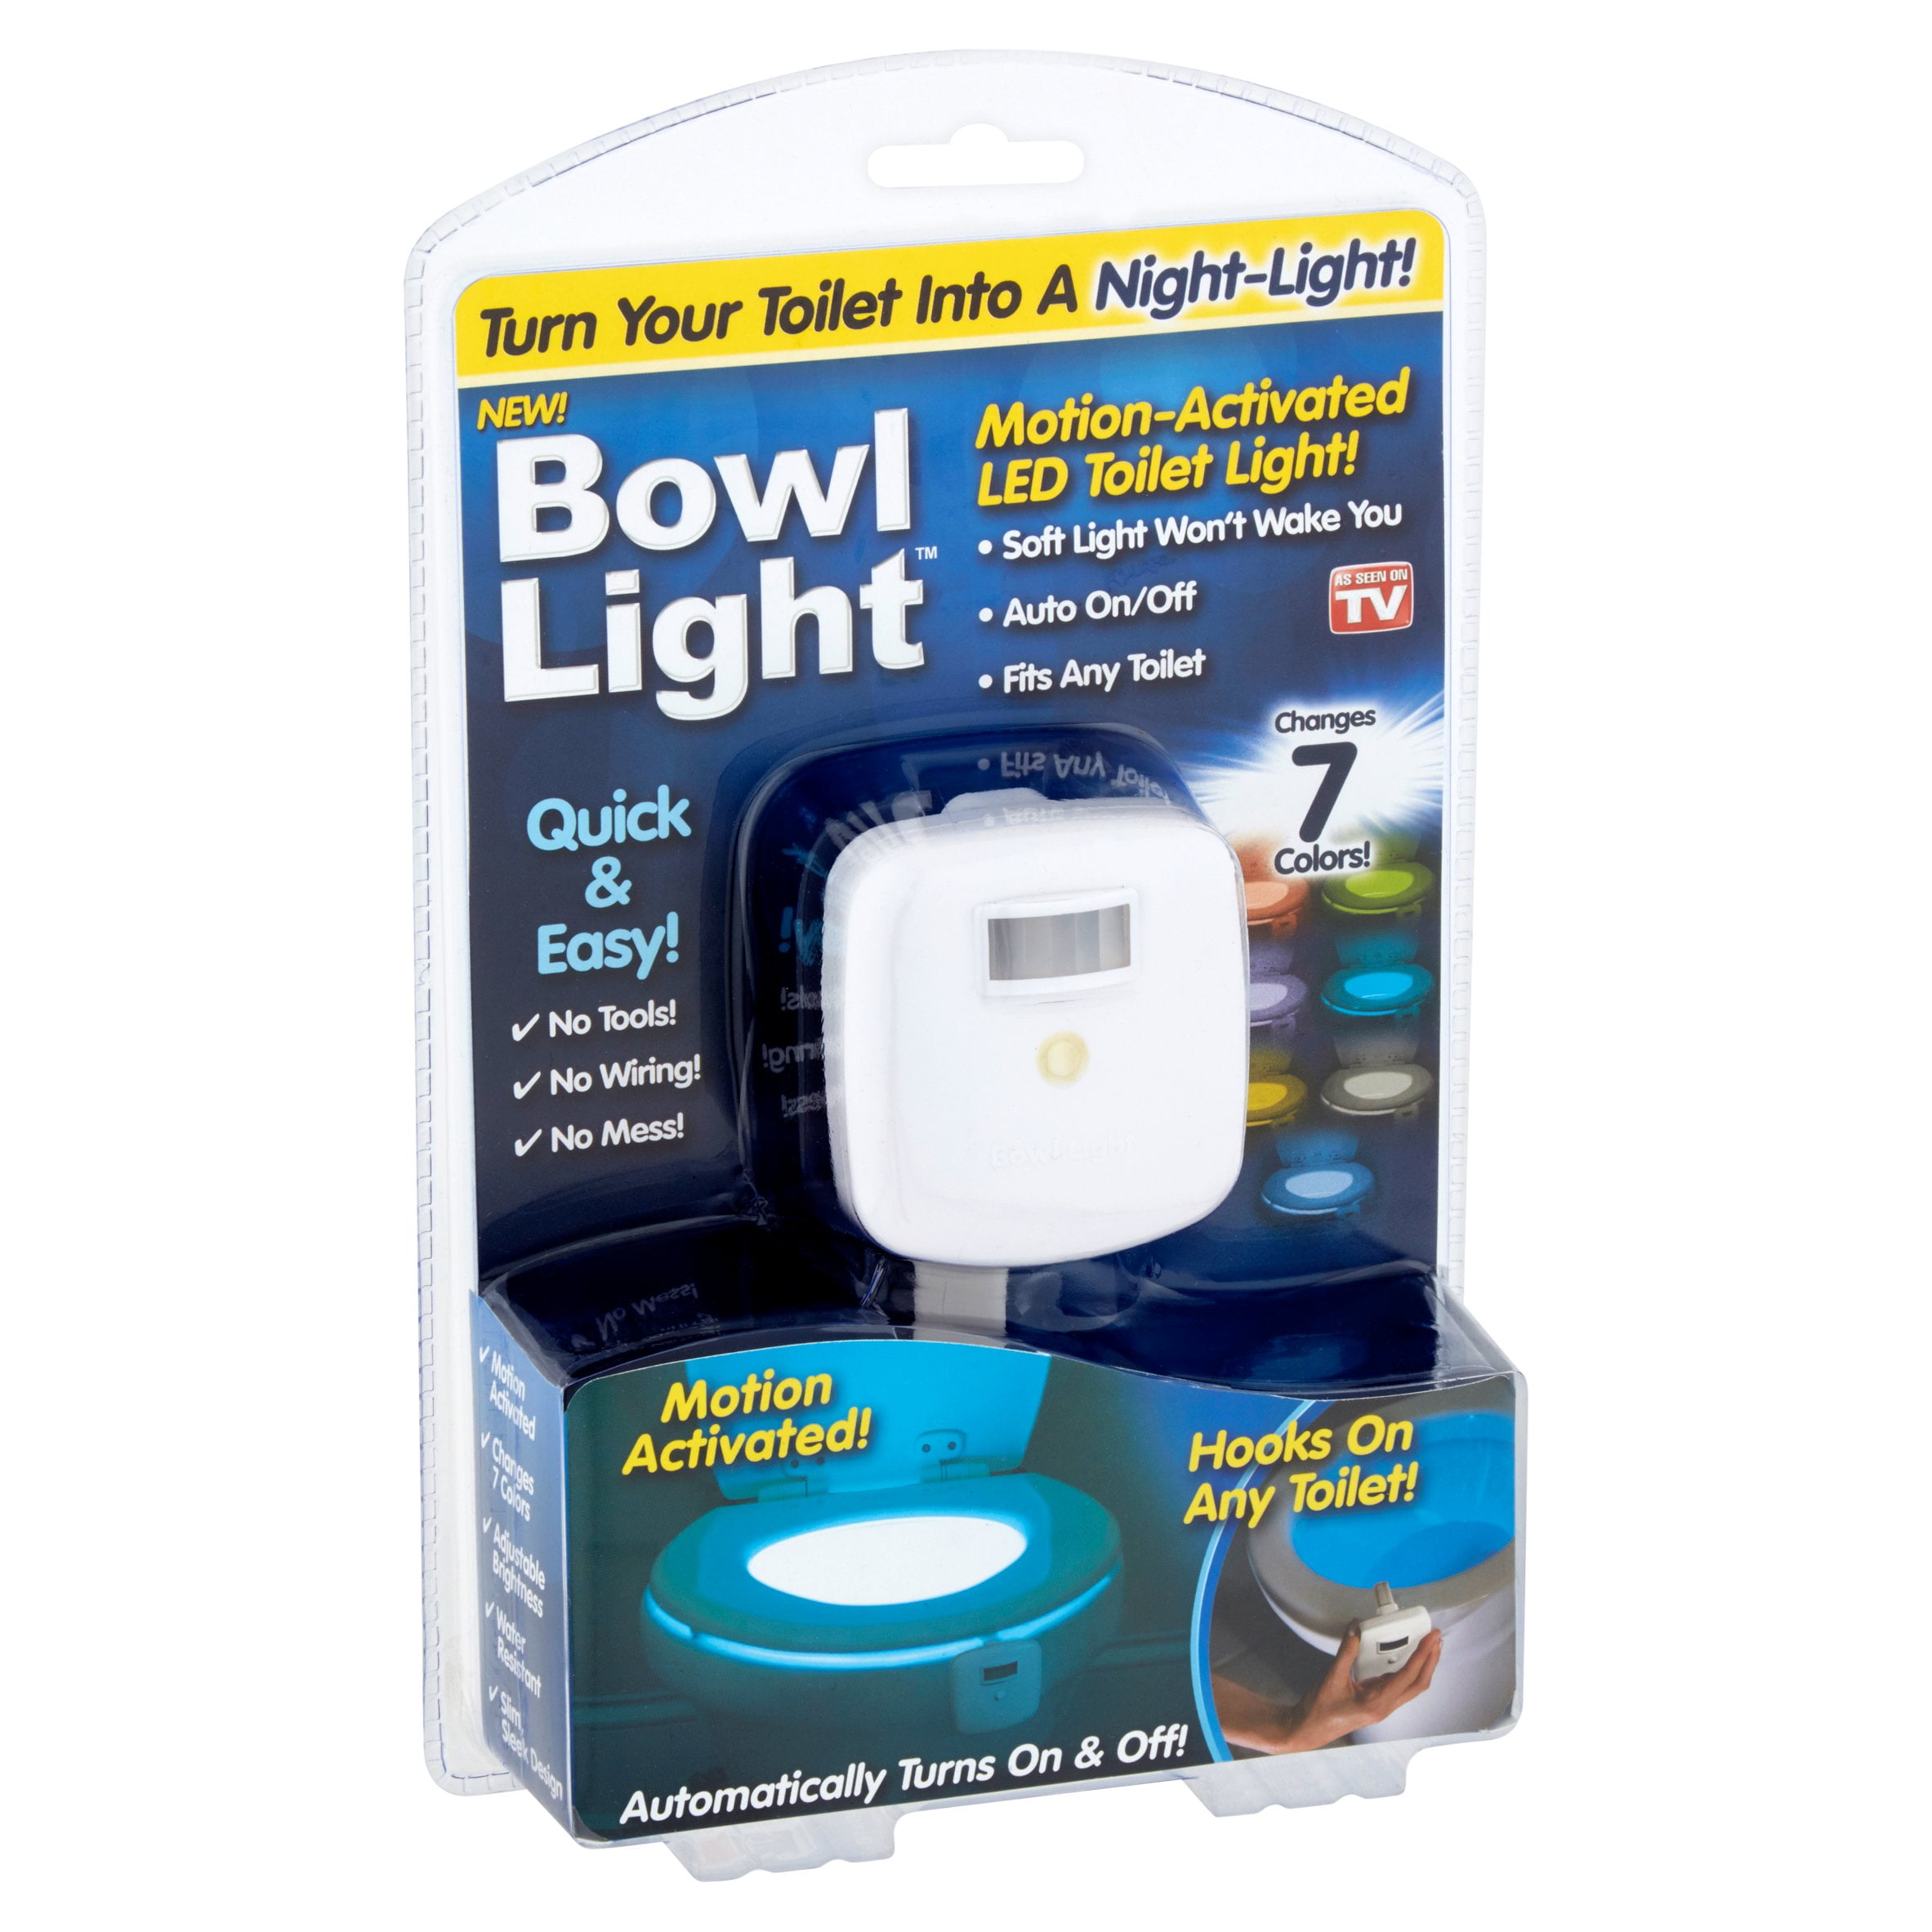 Toilet Disco Light, Motion Activated, Turn Your Late Night-Light